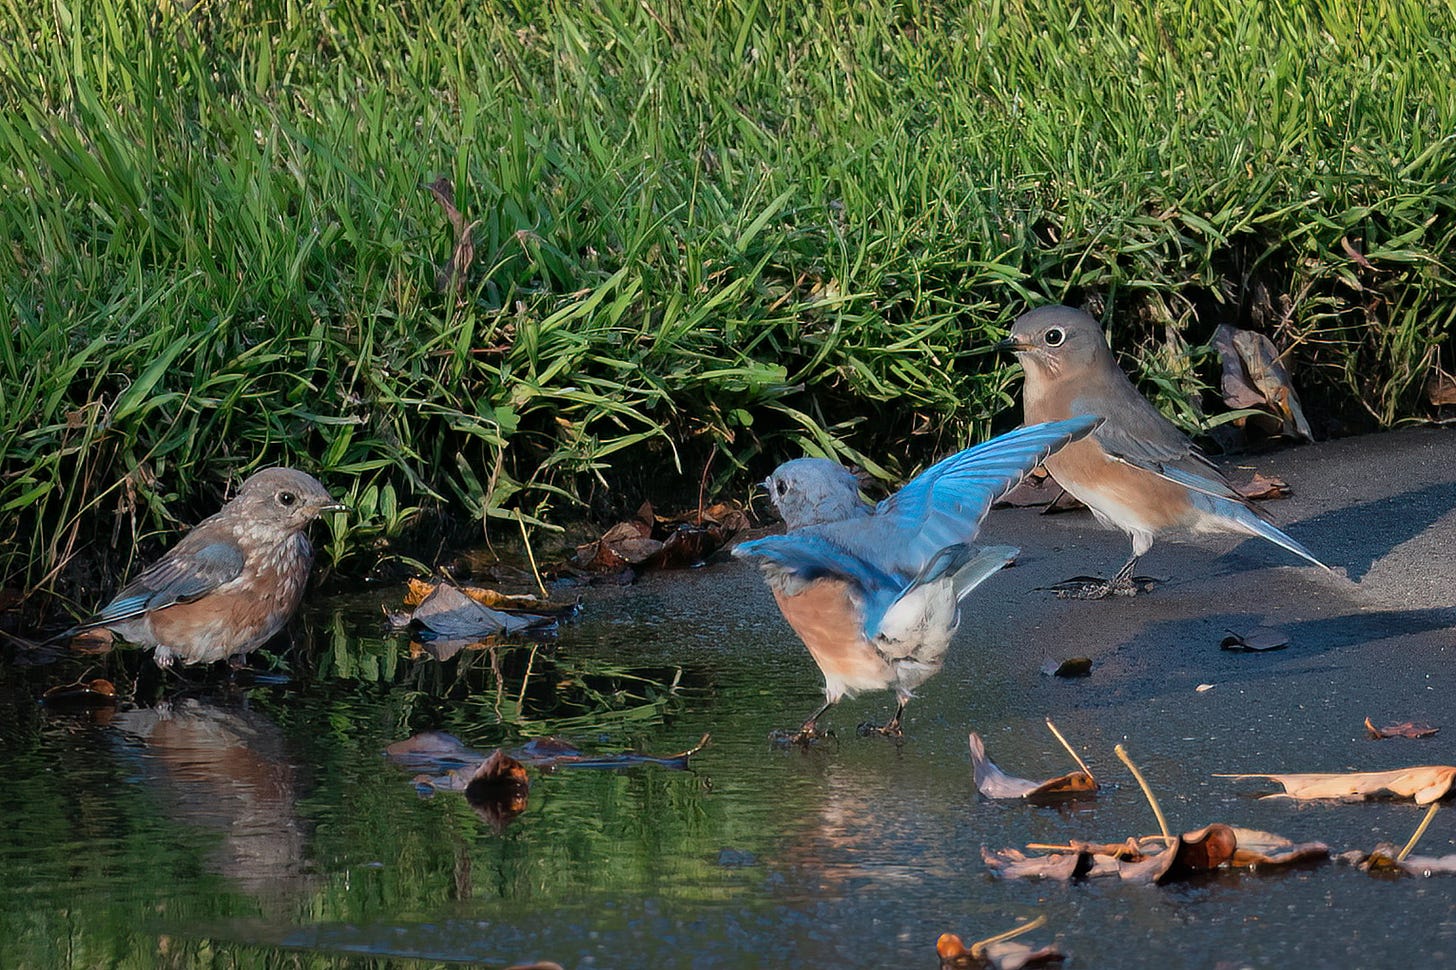 Three bluebirds, one with wings open wide, play in a puddle on the driveway with the green grass in the background